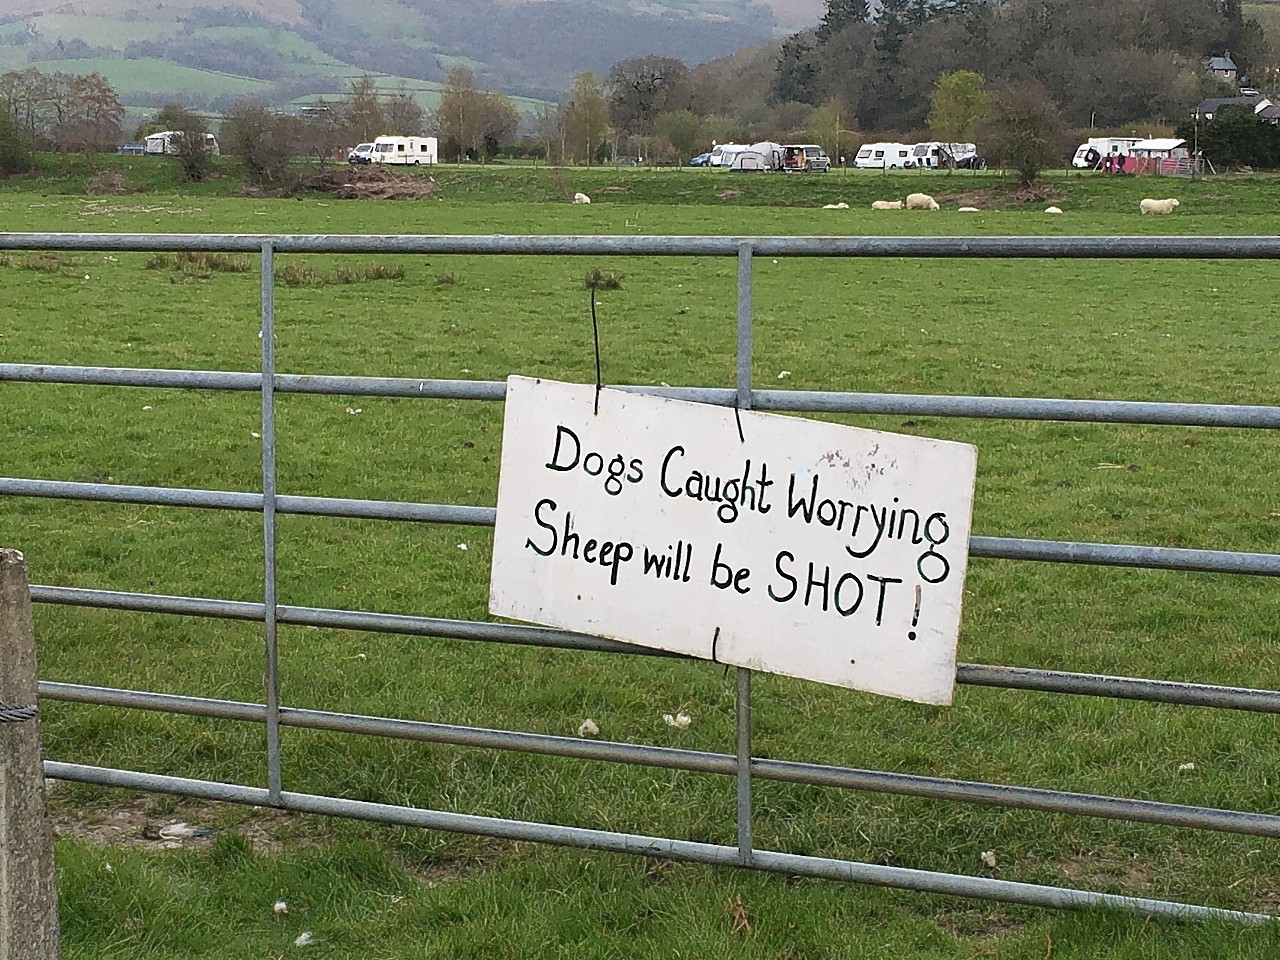 Farmers have the right to shoot dogs found worrying livestock.